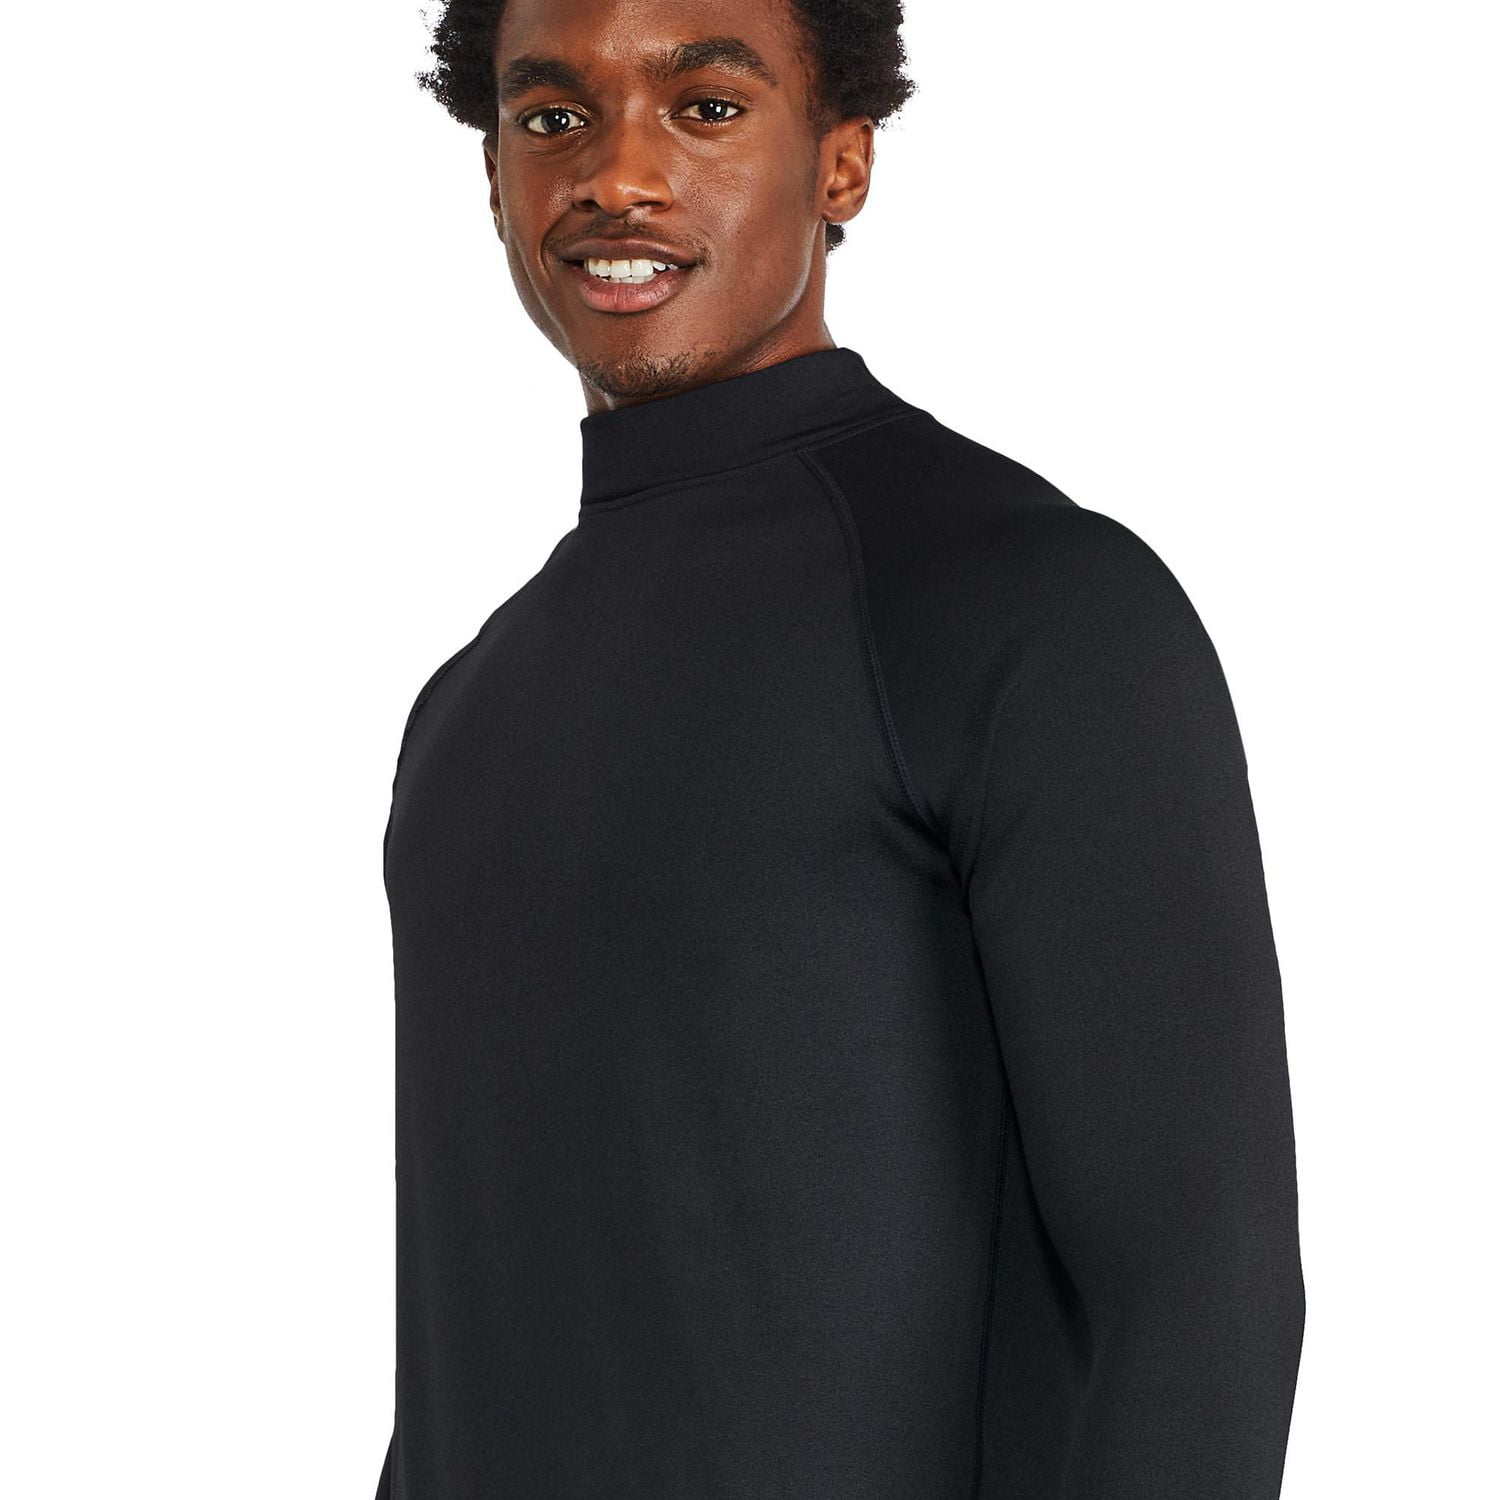 These Cozy Base Layers Are Under $15 At Walmart